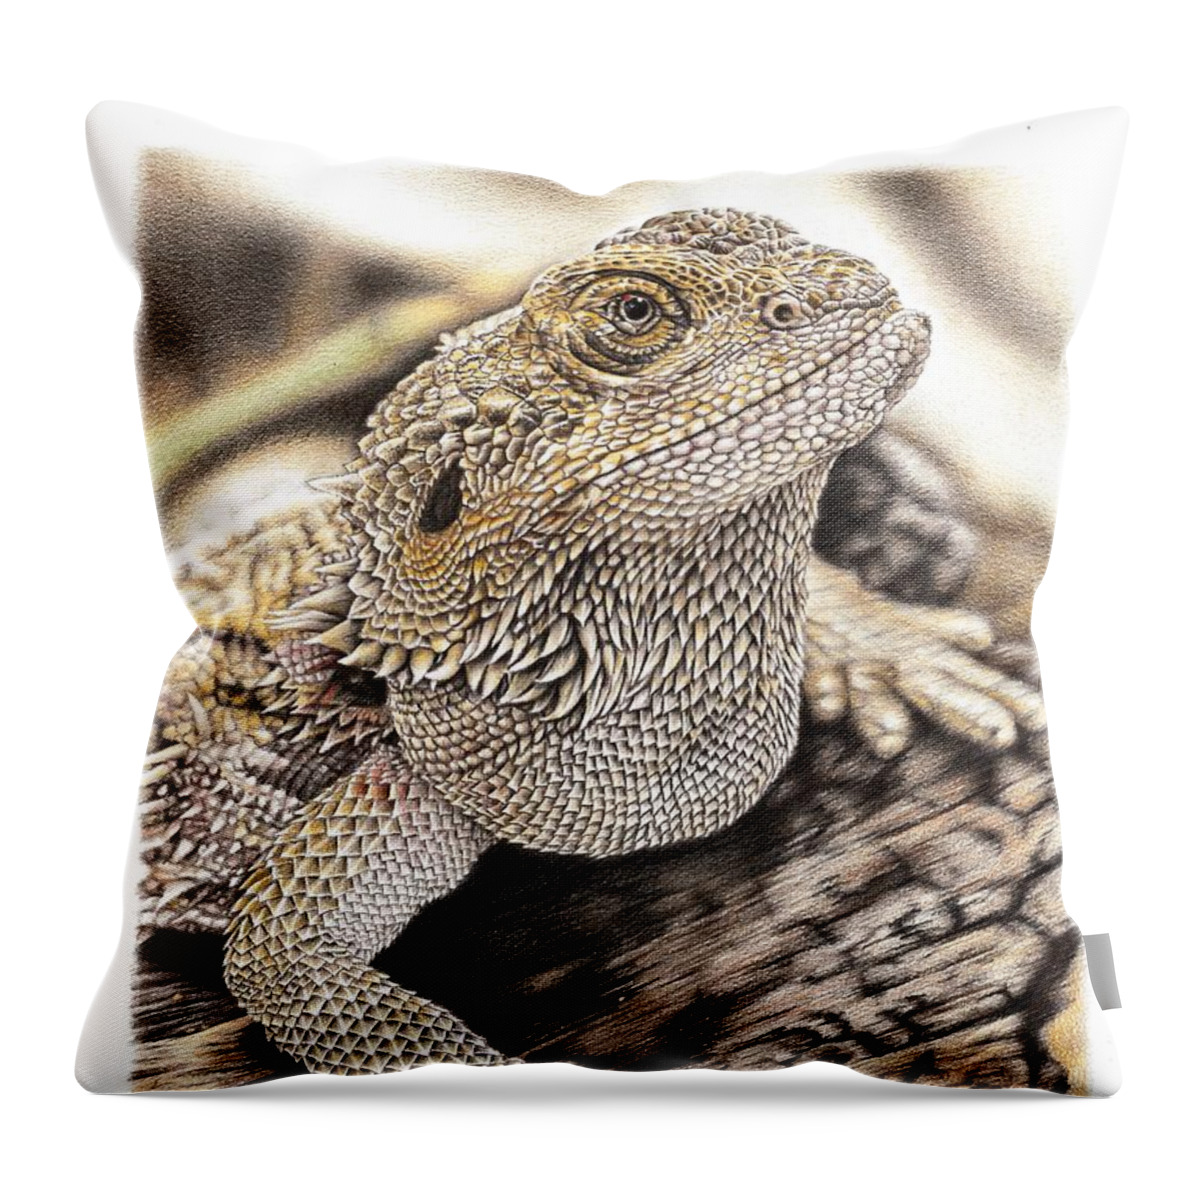 Bearded Dragon Throw Pillow featuring the drawing Bearded Dragon by Casey 'Remrov' Vormer